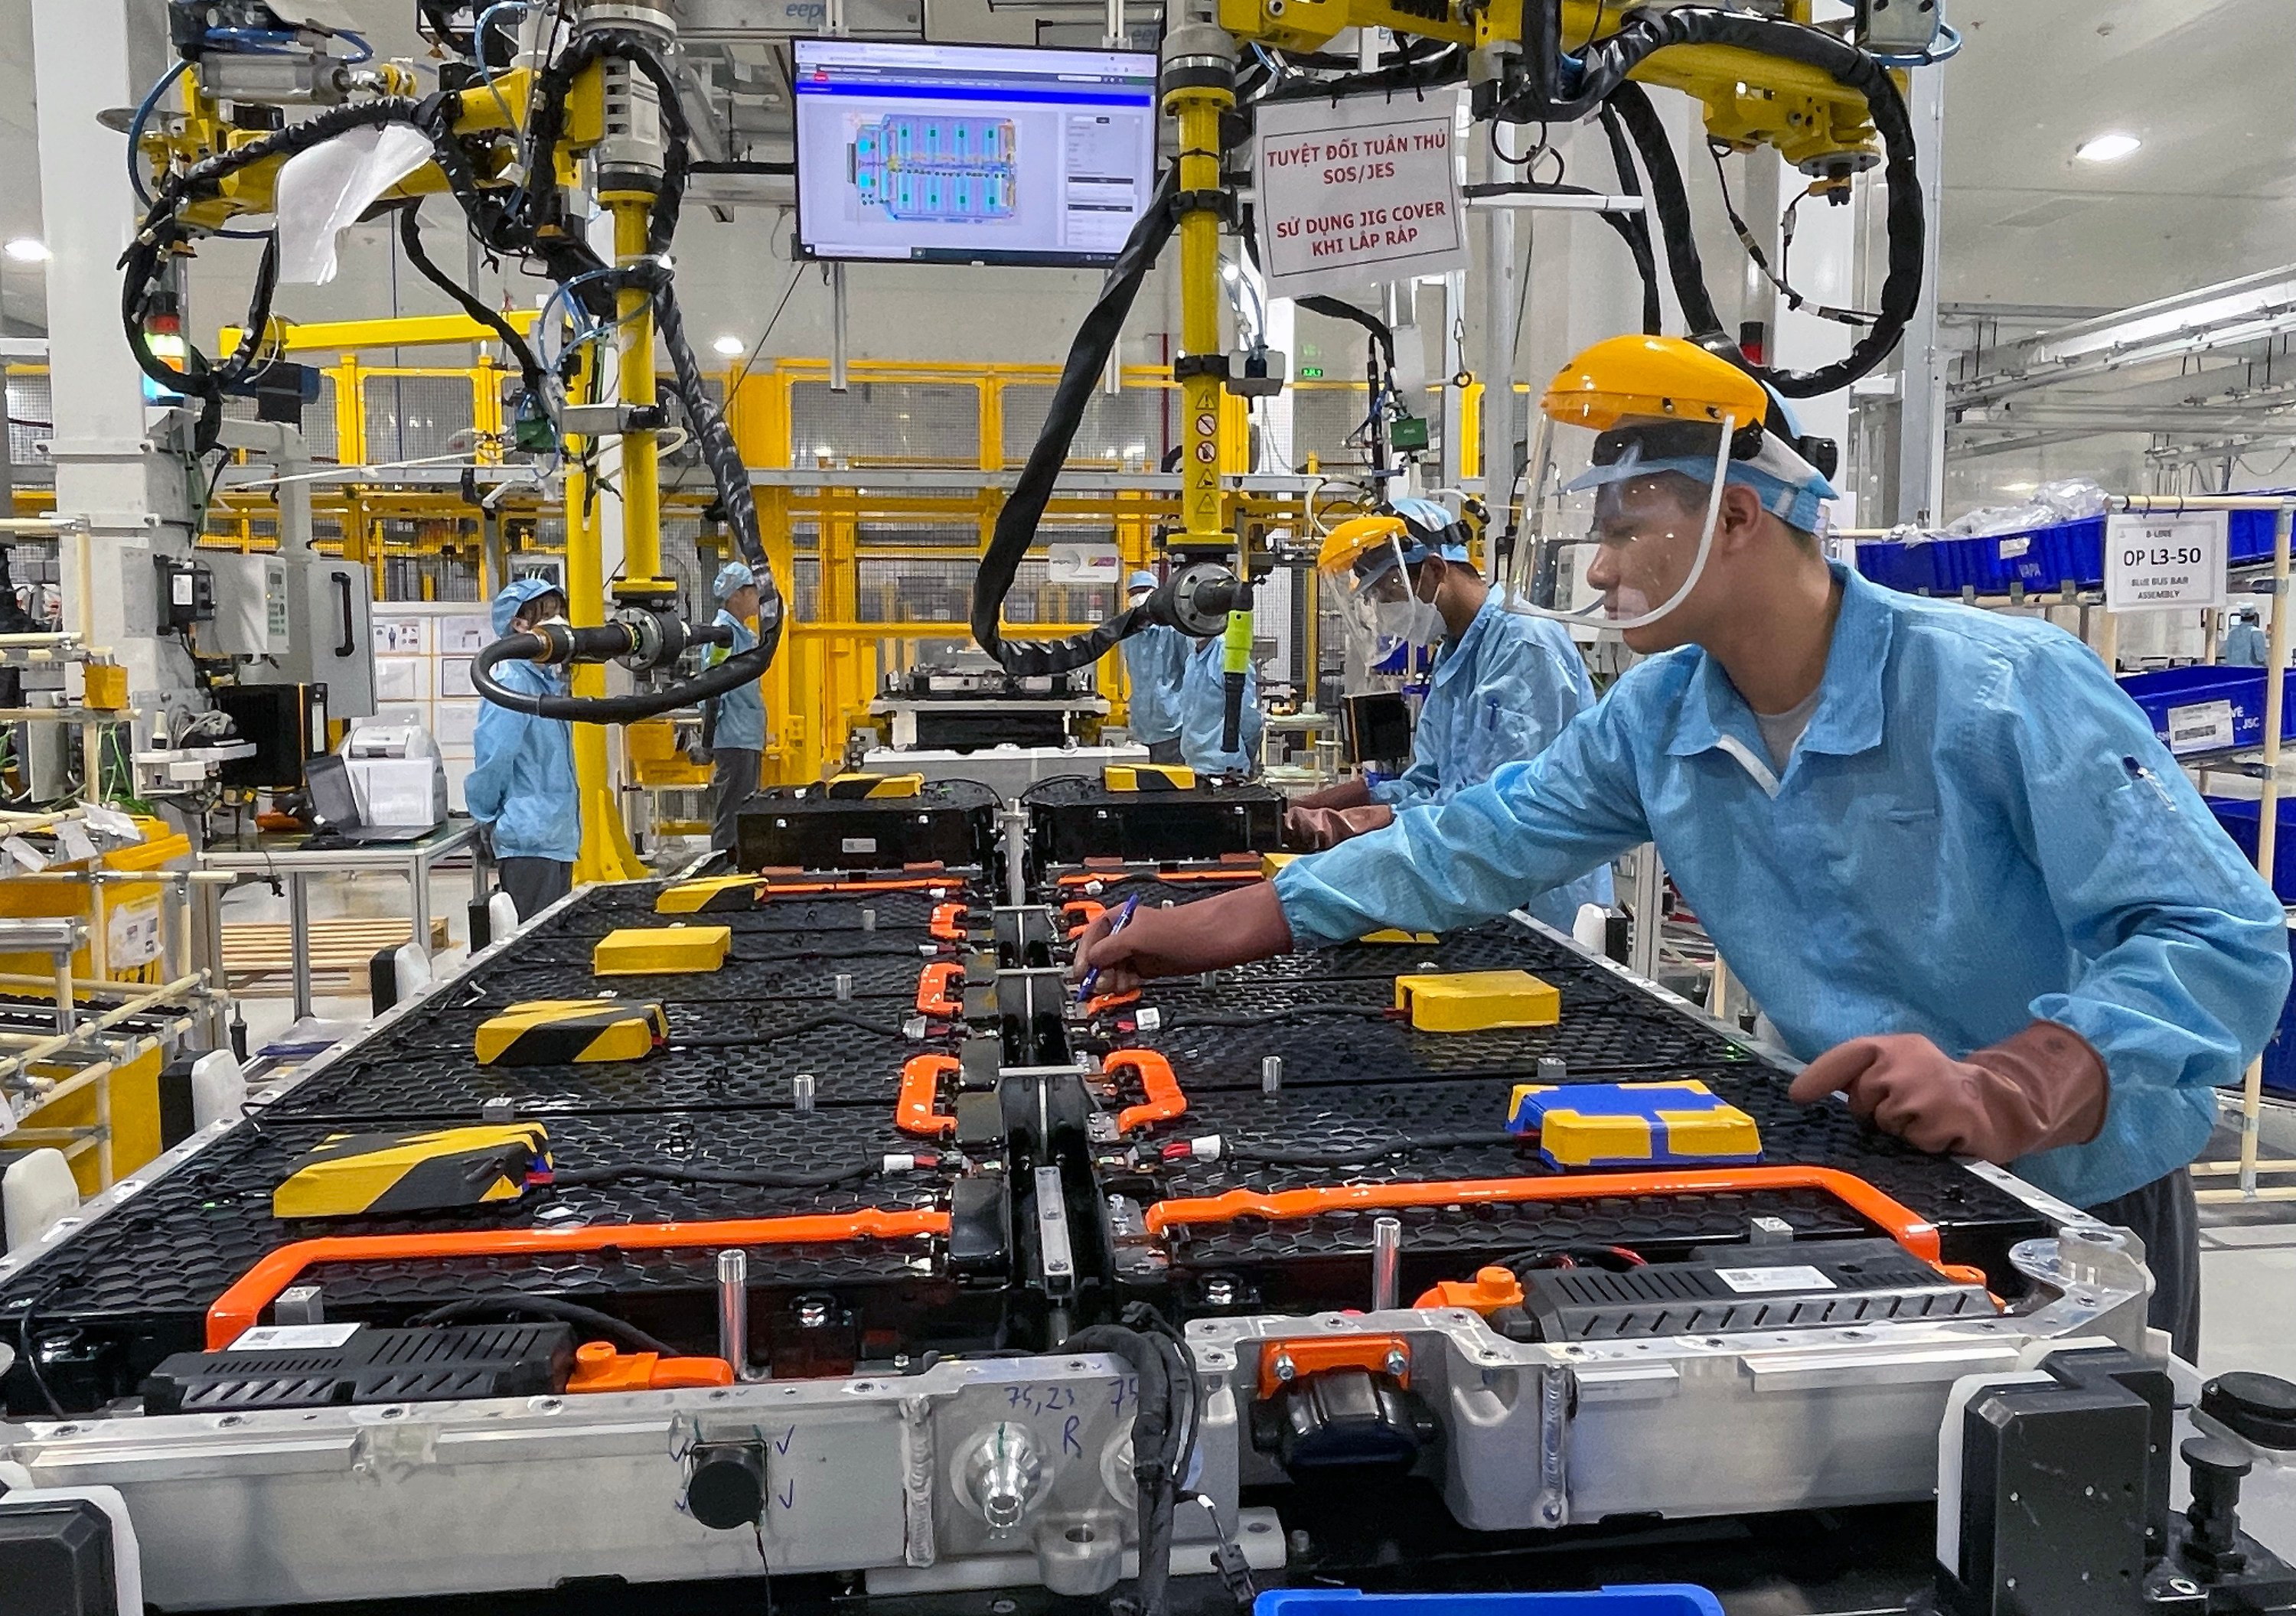 Workers oversee the robots that put together electric vehicles at the fully automated VinFast car factory in Hai Phong, Vietnam, in July 2022. Photo: Getty Images